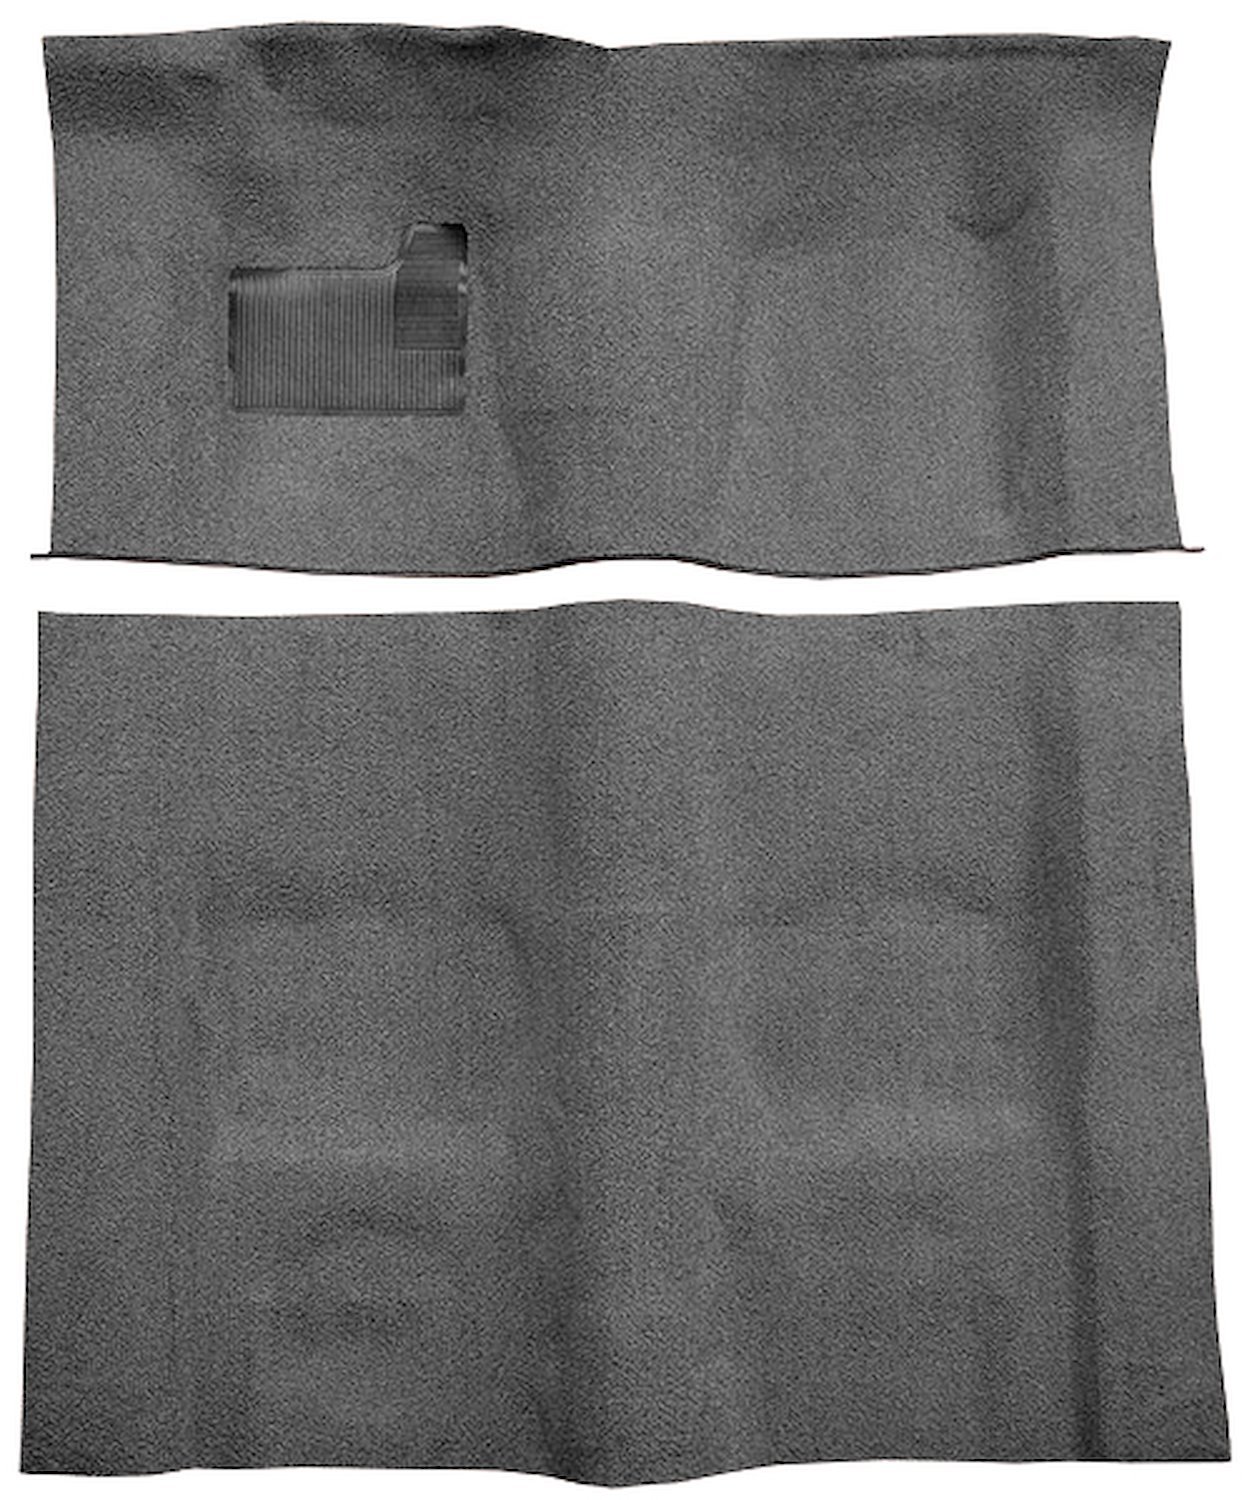 Molded Cut Pile Carpet for 1974-1975 Chevy Camaro,